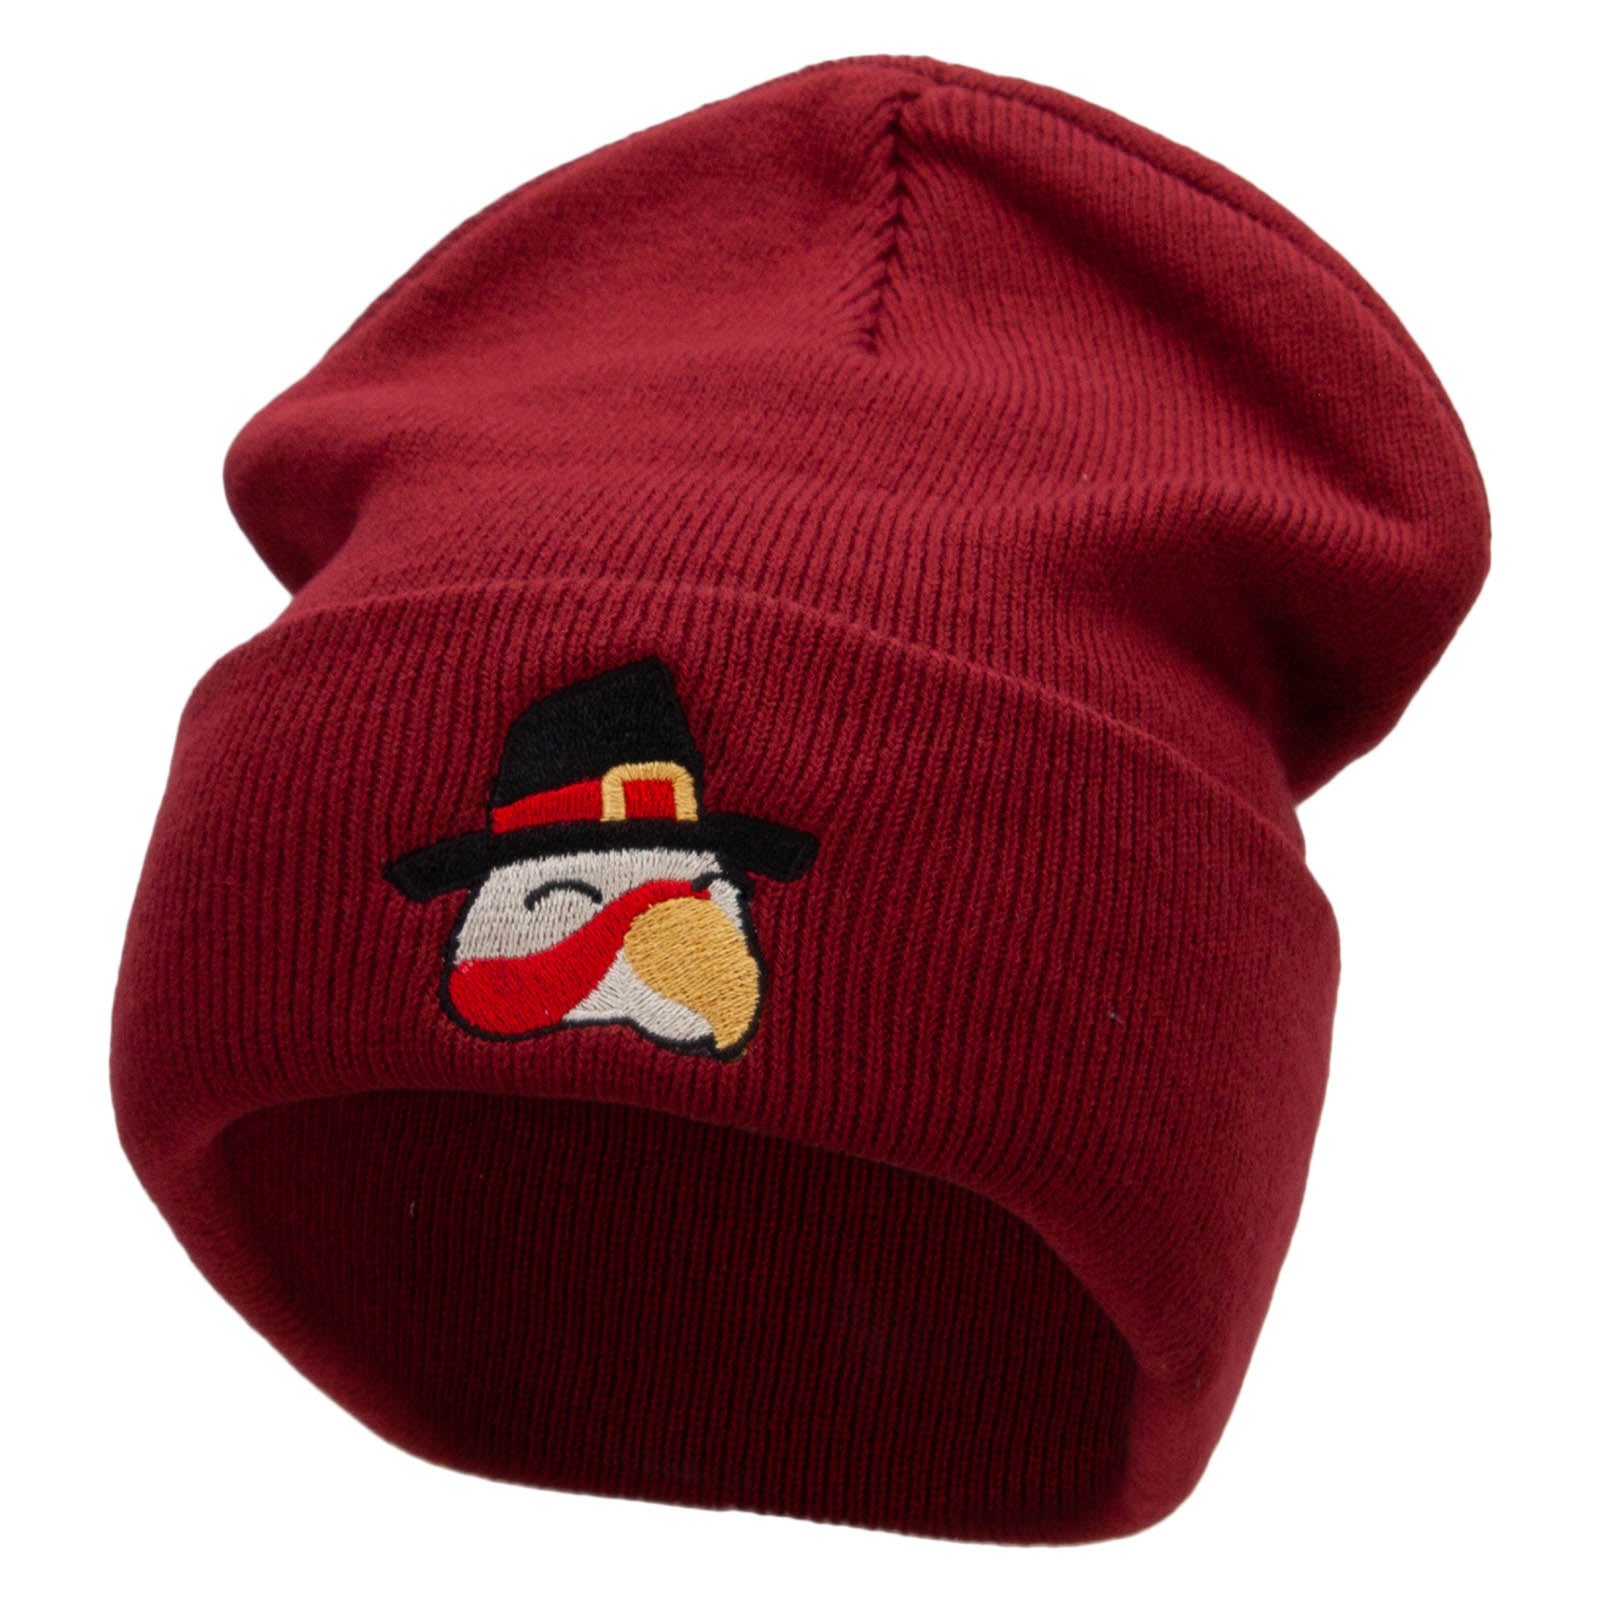 Turkey Head Embroidered 12 Inch Long Knitted Beanie - Maroon OSFM